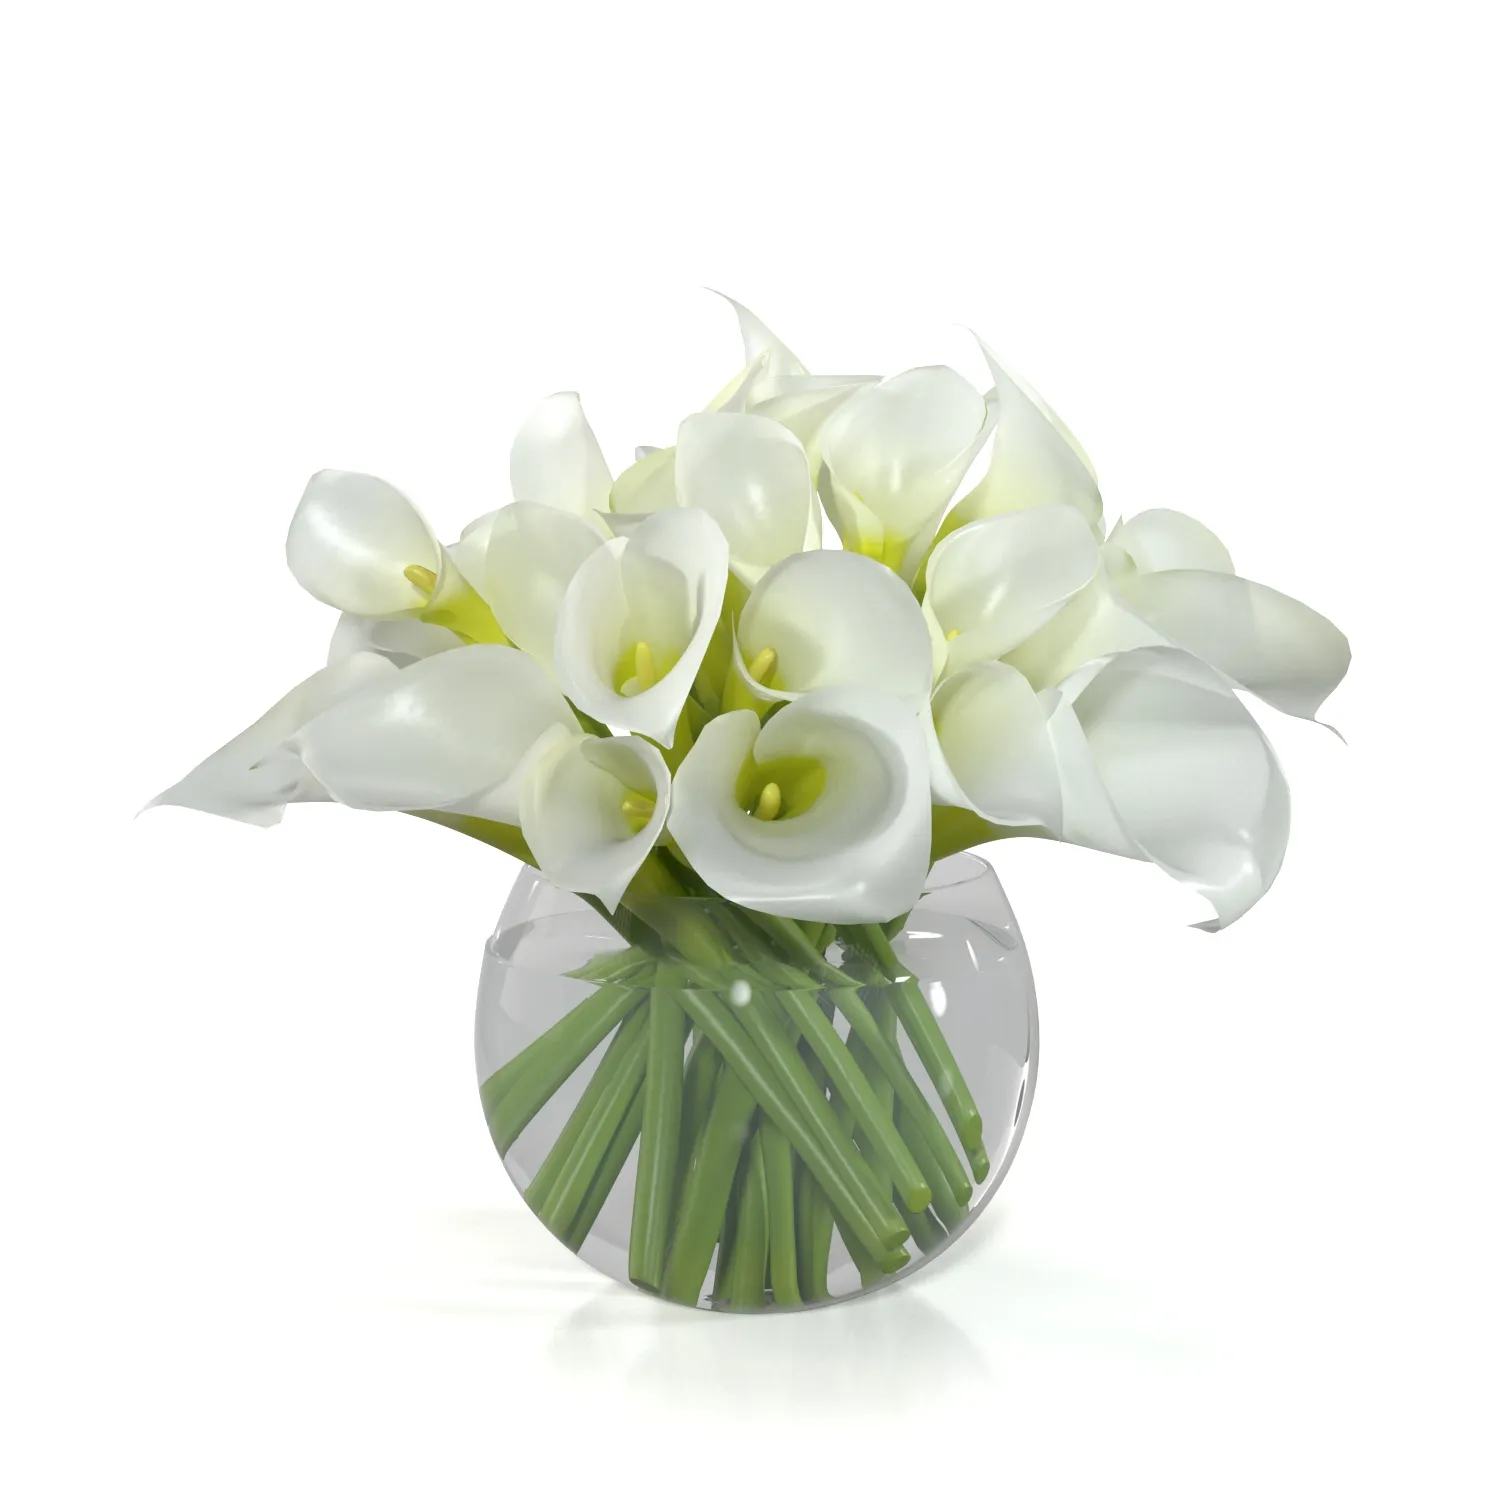 Floating Calla Lily in glass vase PBR 3D Model_01